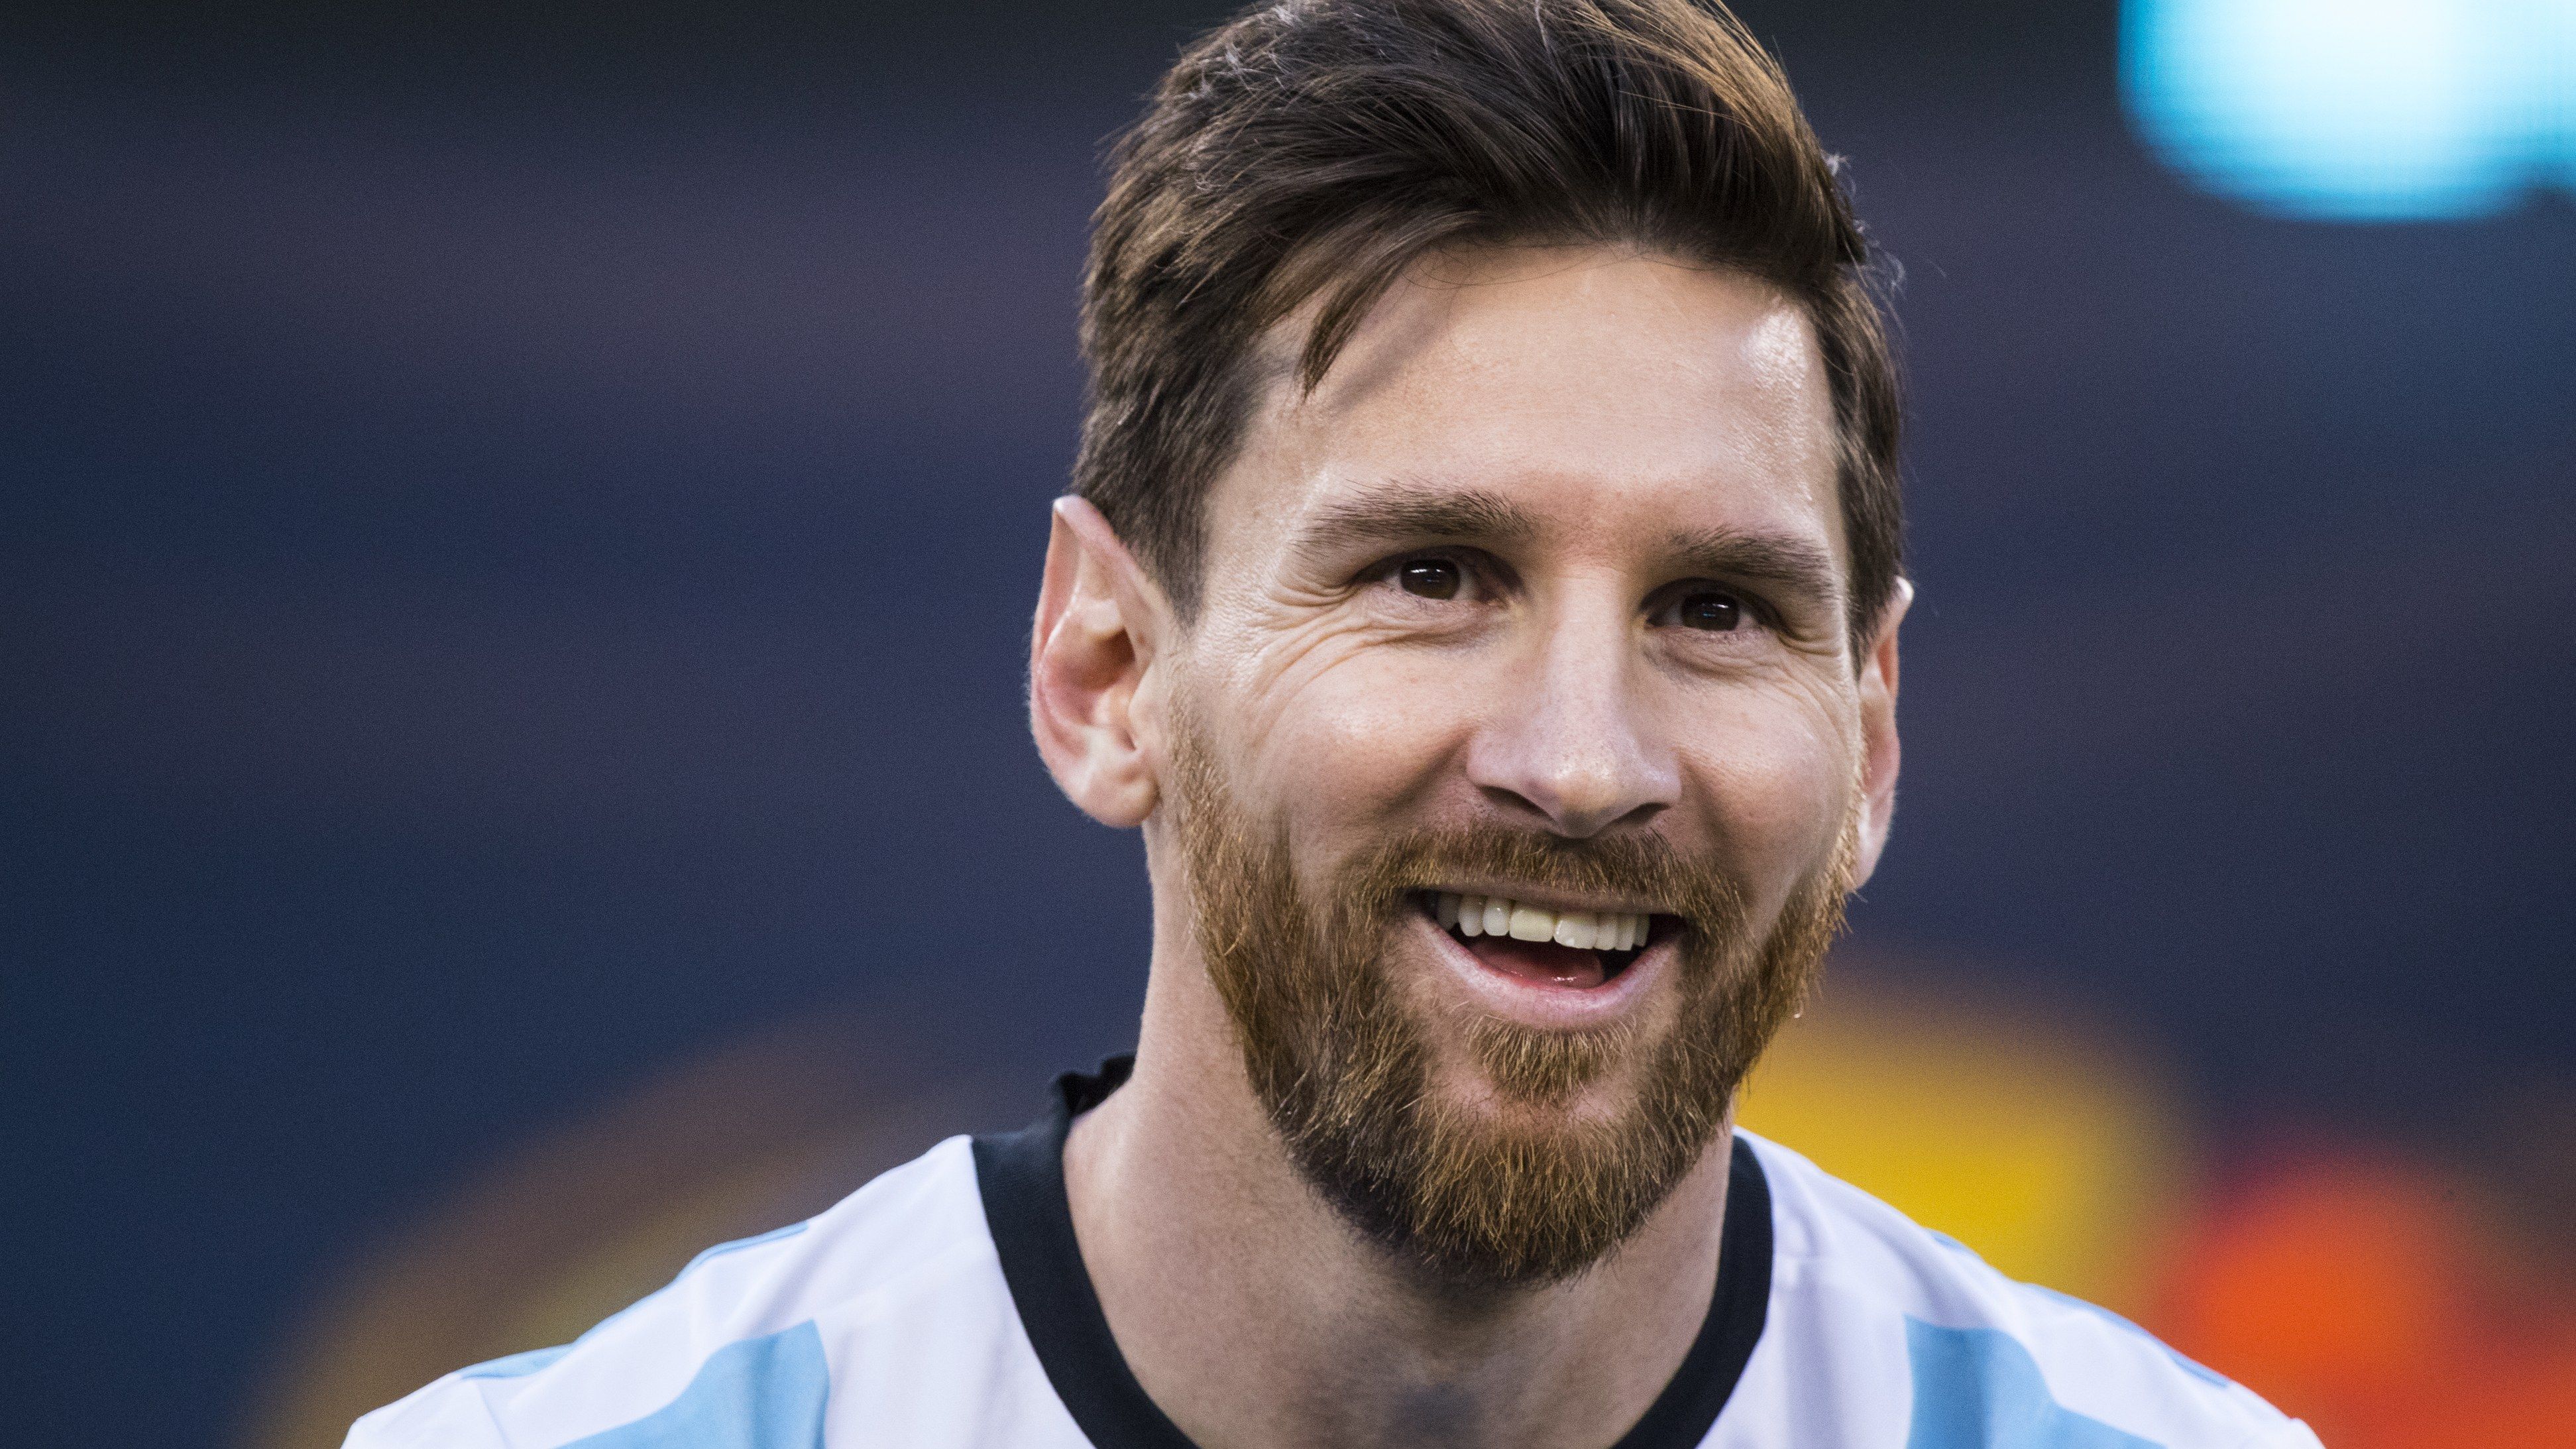 Download wallpaper Lionel Messi, Argentina, portrait, joy, smile, Argentinian football player, Leo Messi, 4k, national team, football for desktop with resolution 3887x2186. High Quality HD picture wallpaper